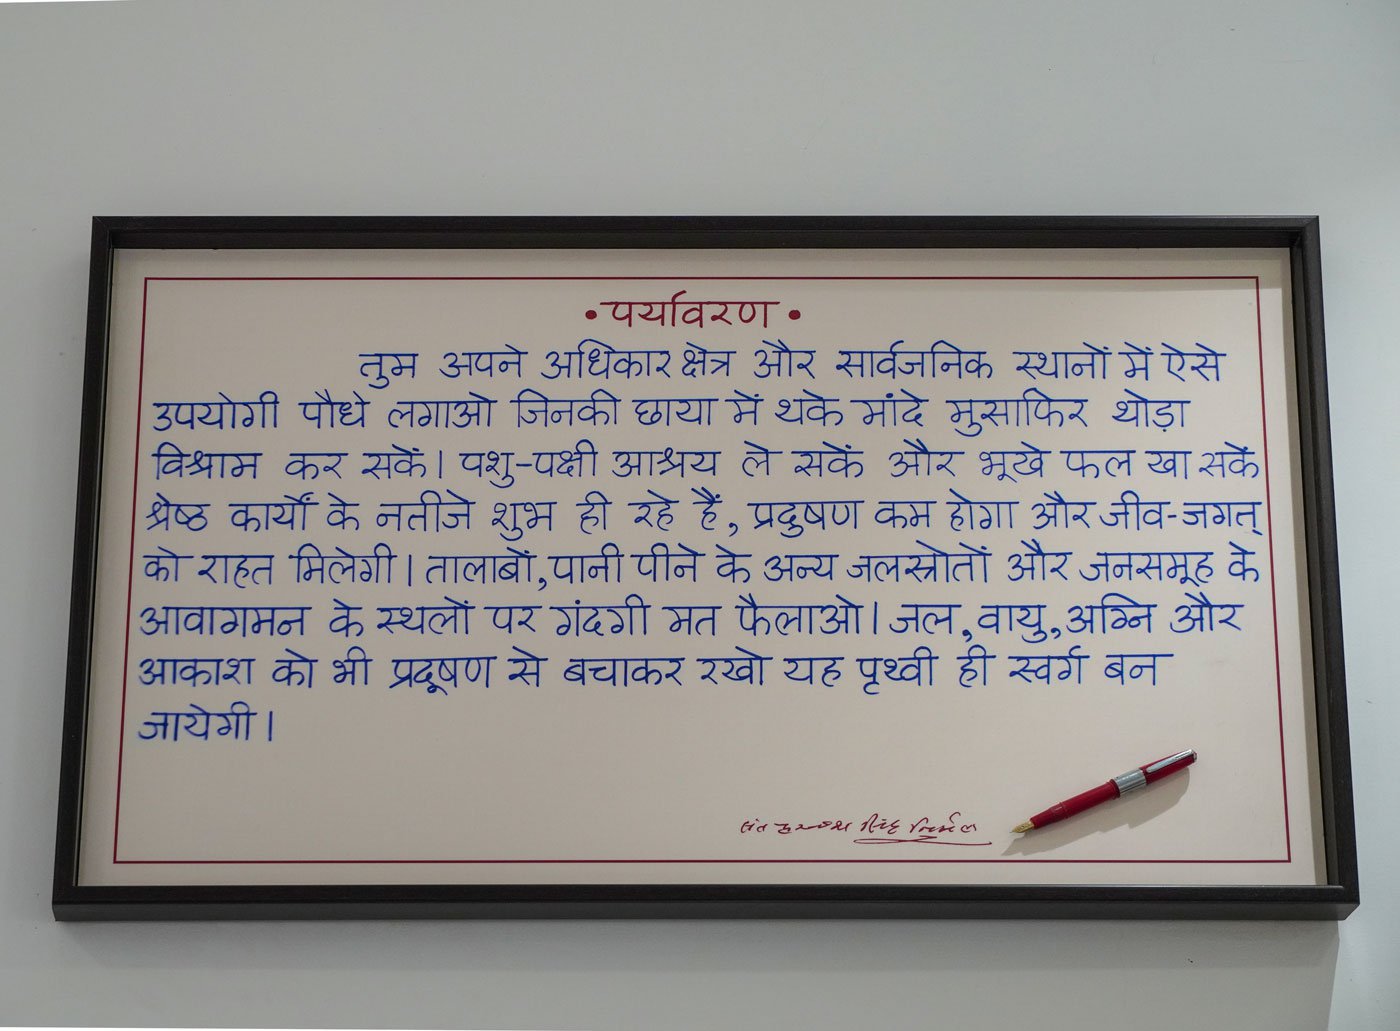 A letter signed by library founder, Harvansh Singh Nirmal is displayed prominently